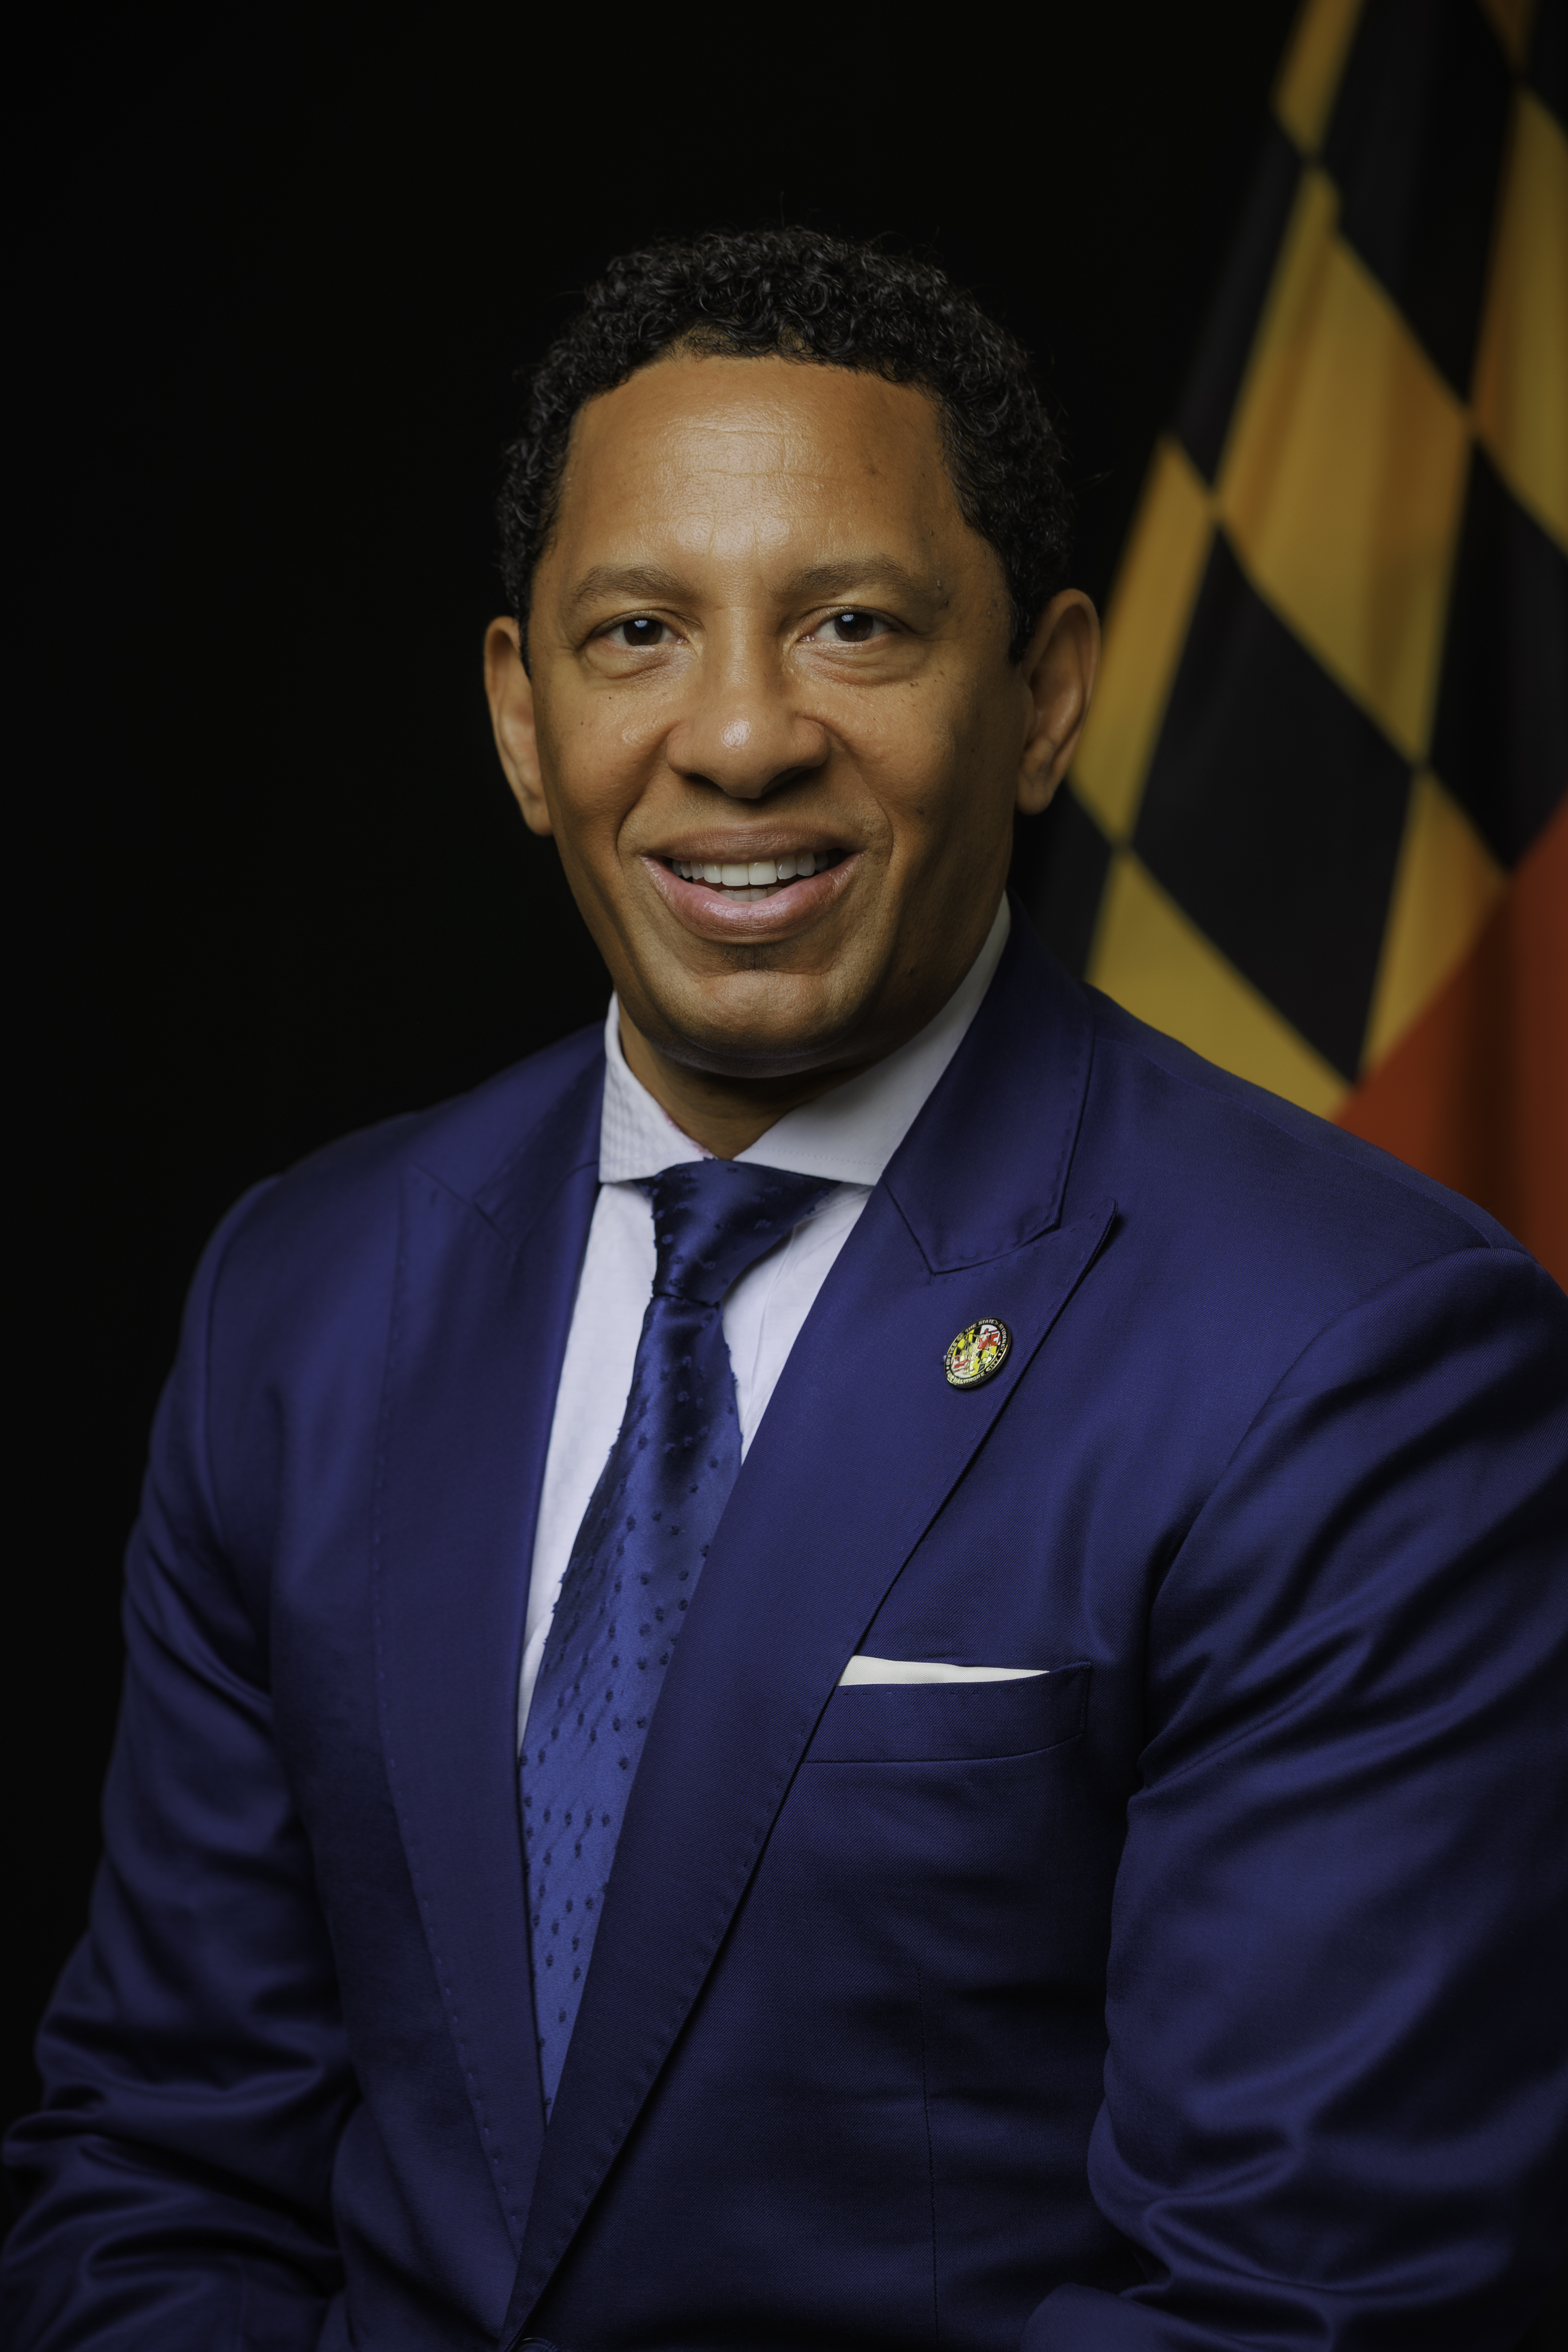 Baltimore City State's Attorney Ivan Bates on parents, youth & curbing crime